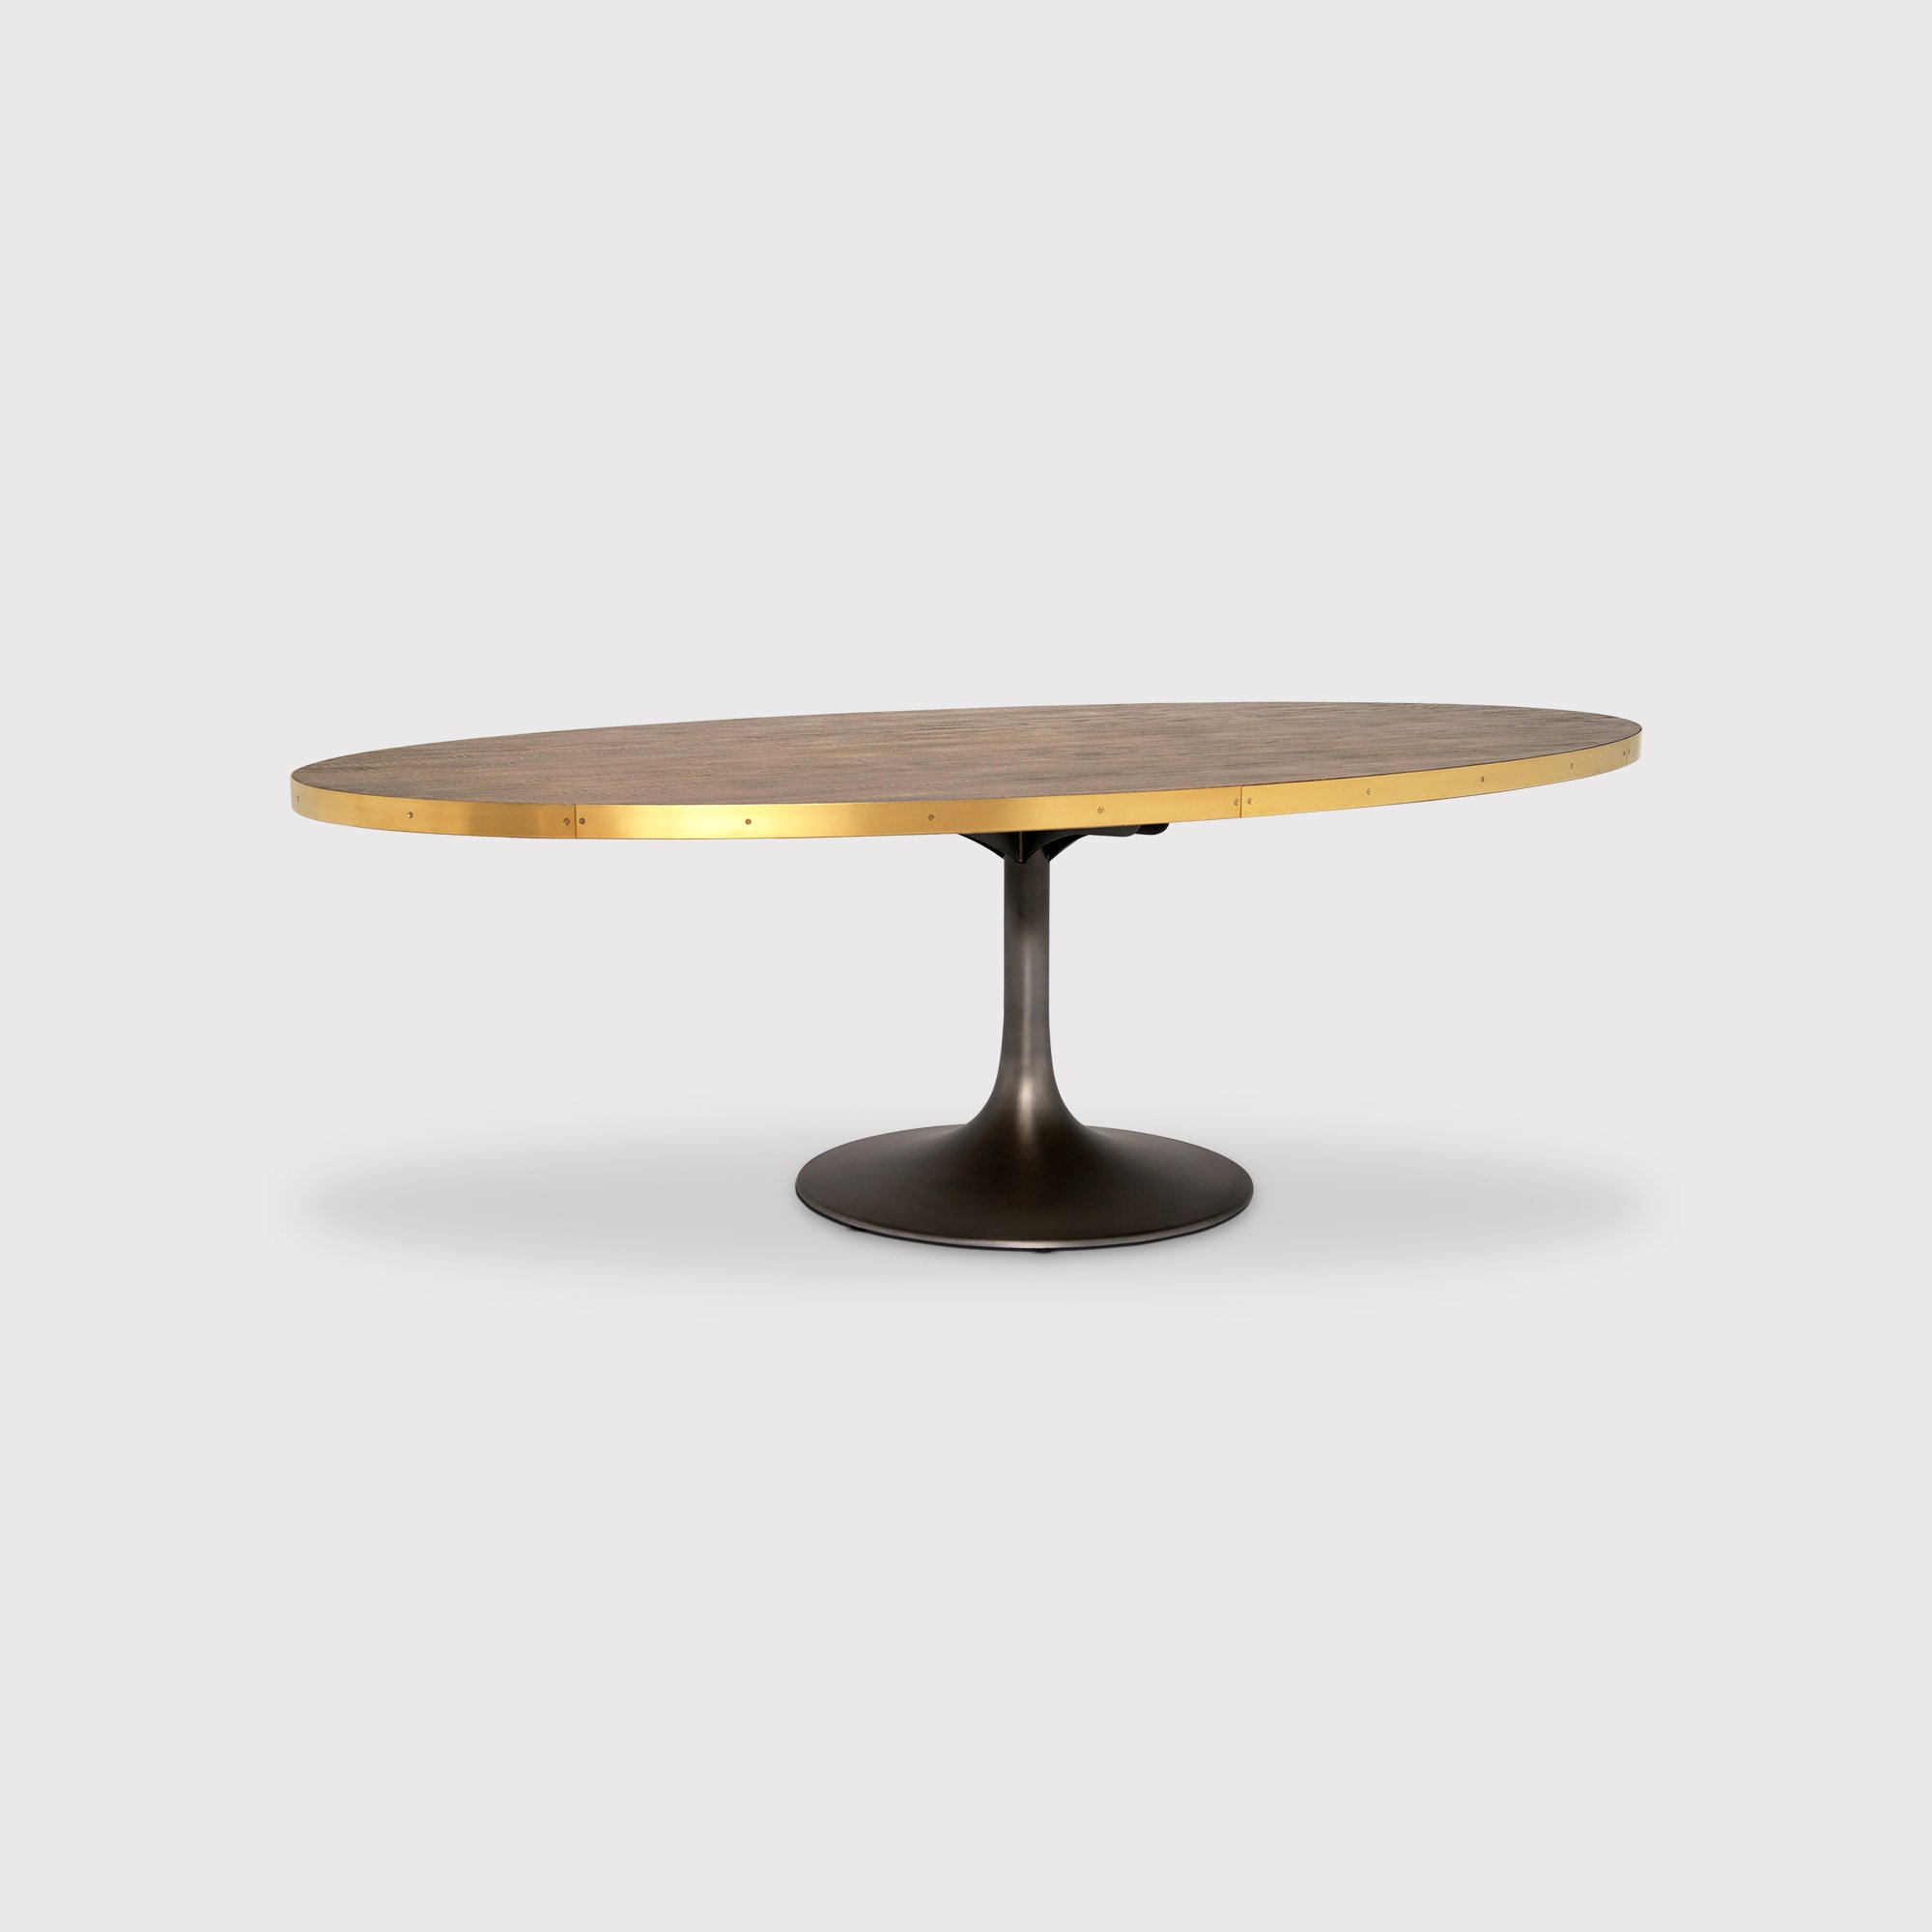 Talula Tulip Oval Dining Table 250x130x78cm, Neutral | Barker & Stonehouse